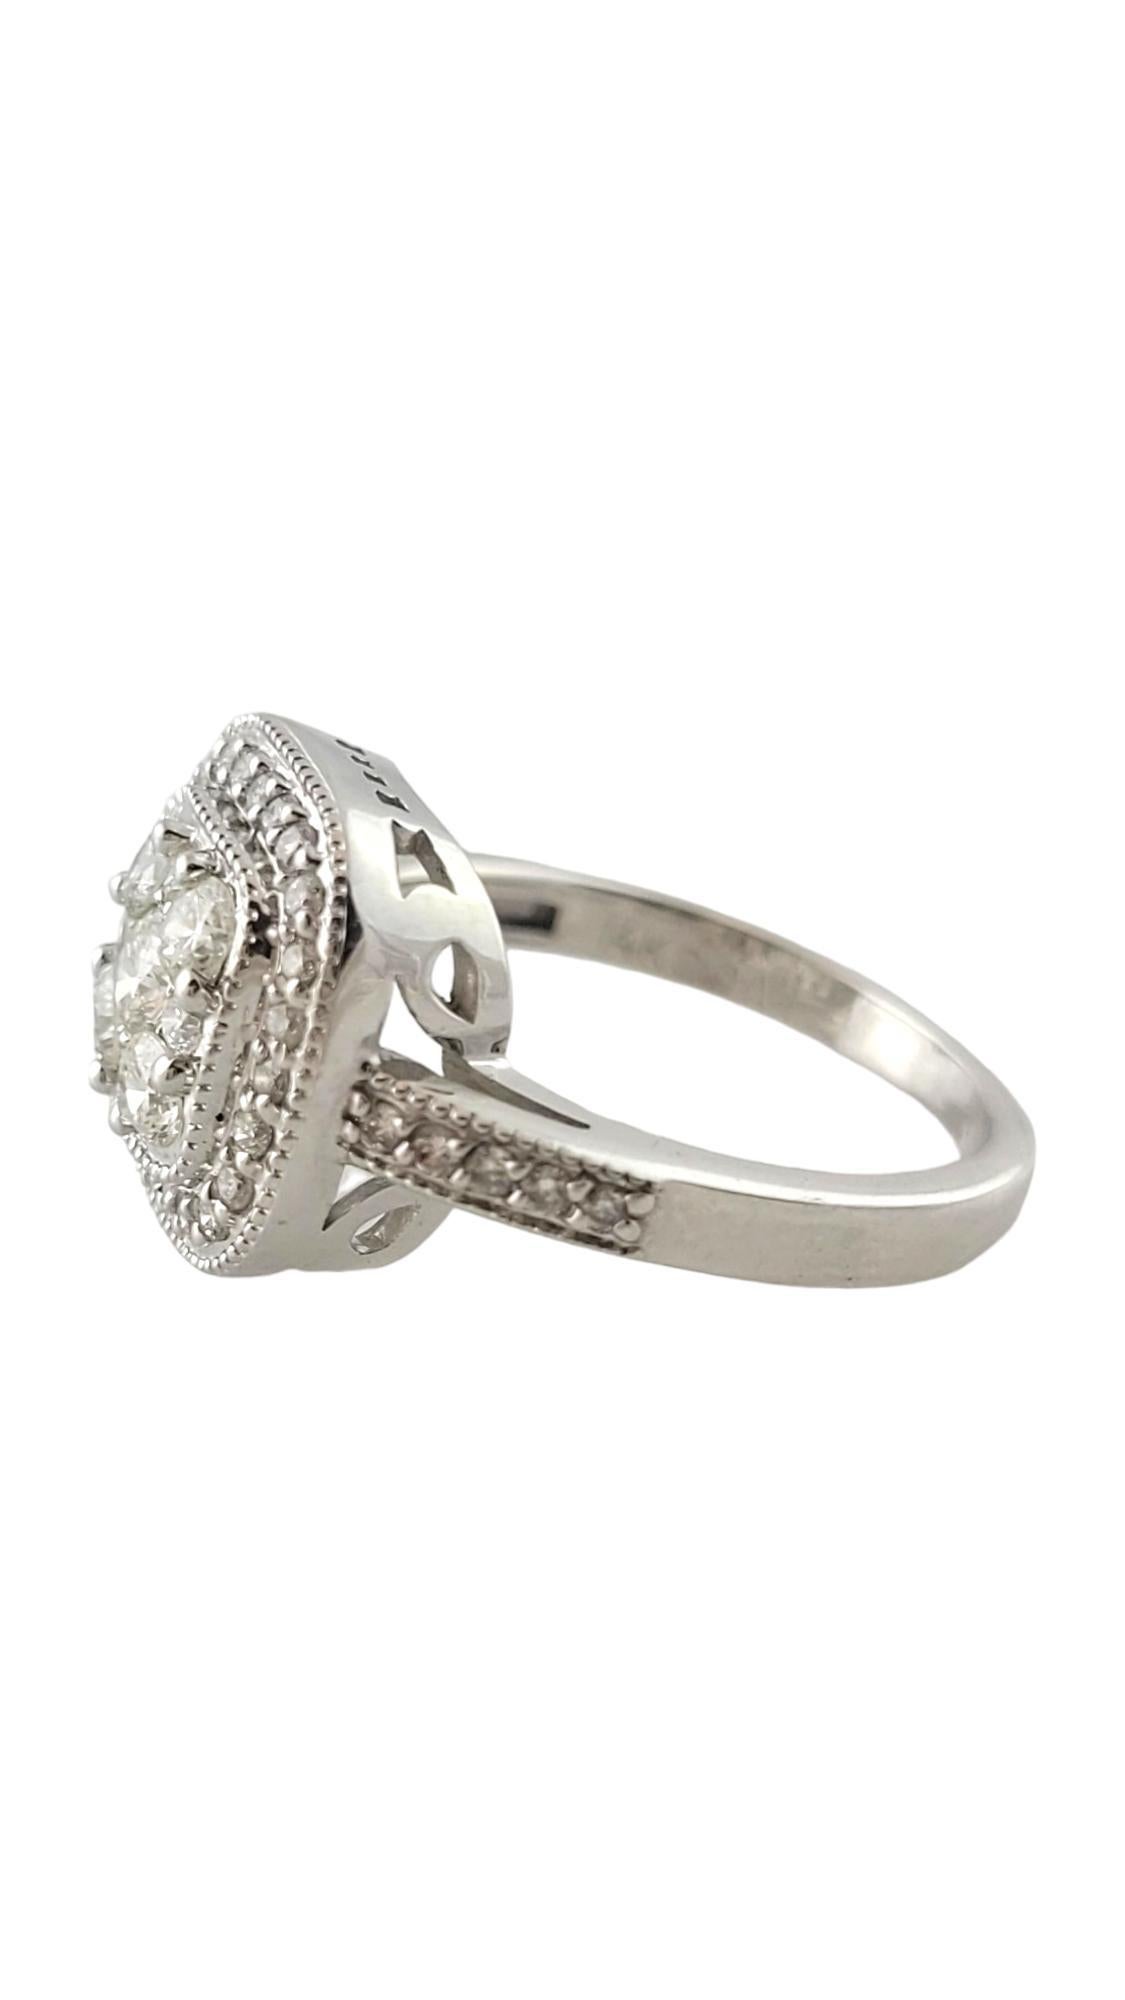 14 Karat White Gold Diamond Cluster Ring Size 5.75

This sparkling ring features 43 round brilliant cut diamonds set in classic 14K white gold. 

 Width:  12 mm.  Shank:  2 mm.

Approximate total diamond weight:  1.0 ct.

Diamond clarity: